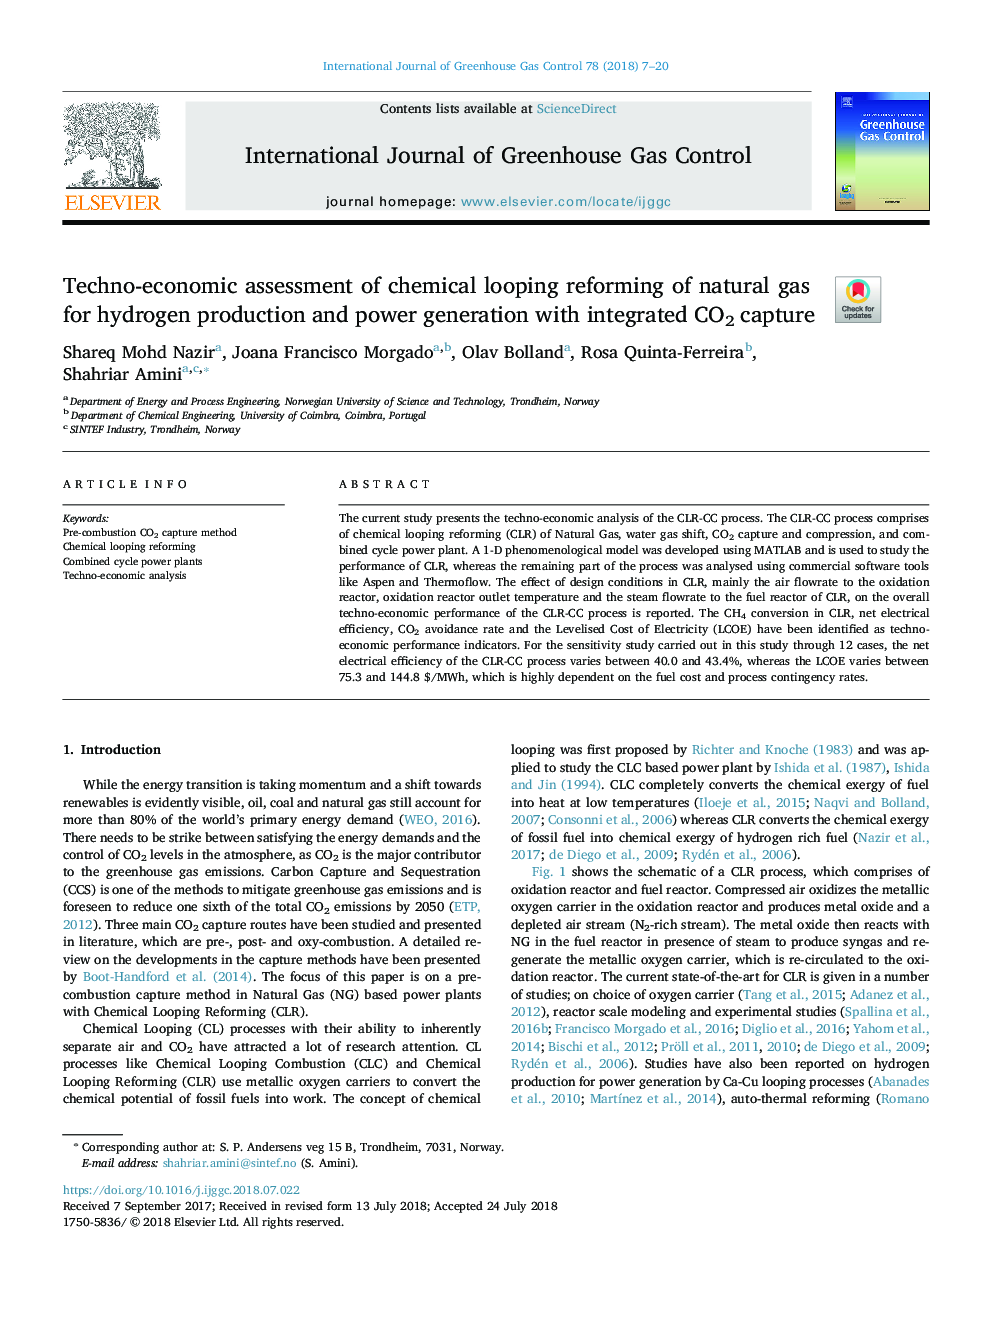 Techno-economic assessment of chemical looping reforming of natural gas for hydrogen production and power generation with integrated CO2 capture